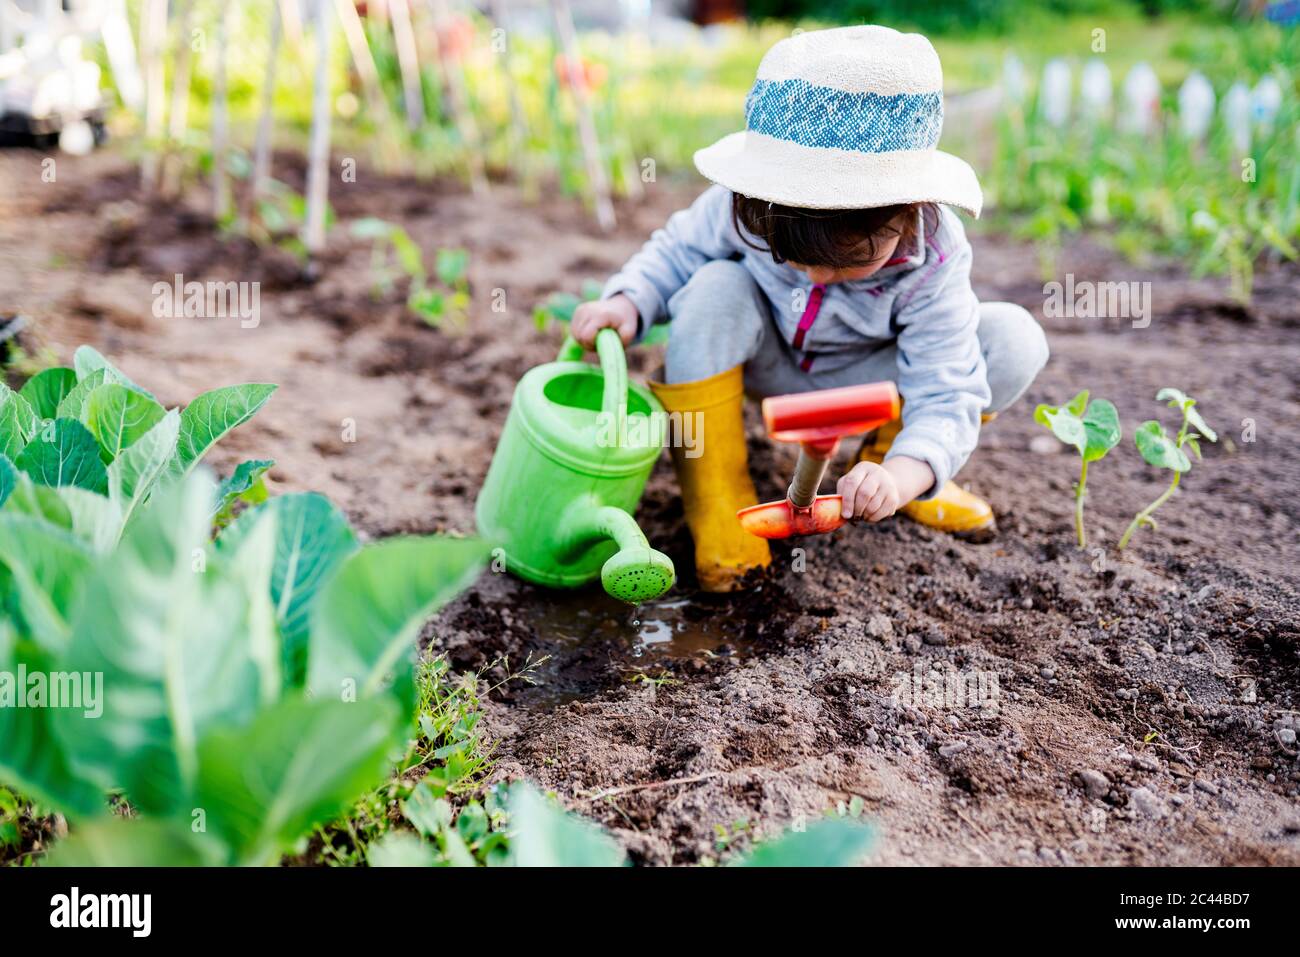 Full length of preschool girl crouching while holding watering can and shovel at orchard Stock Photo